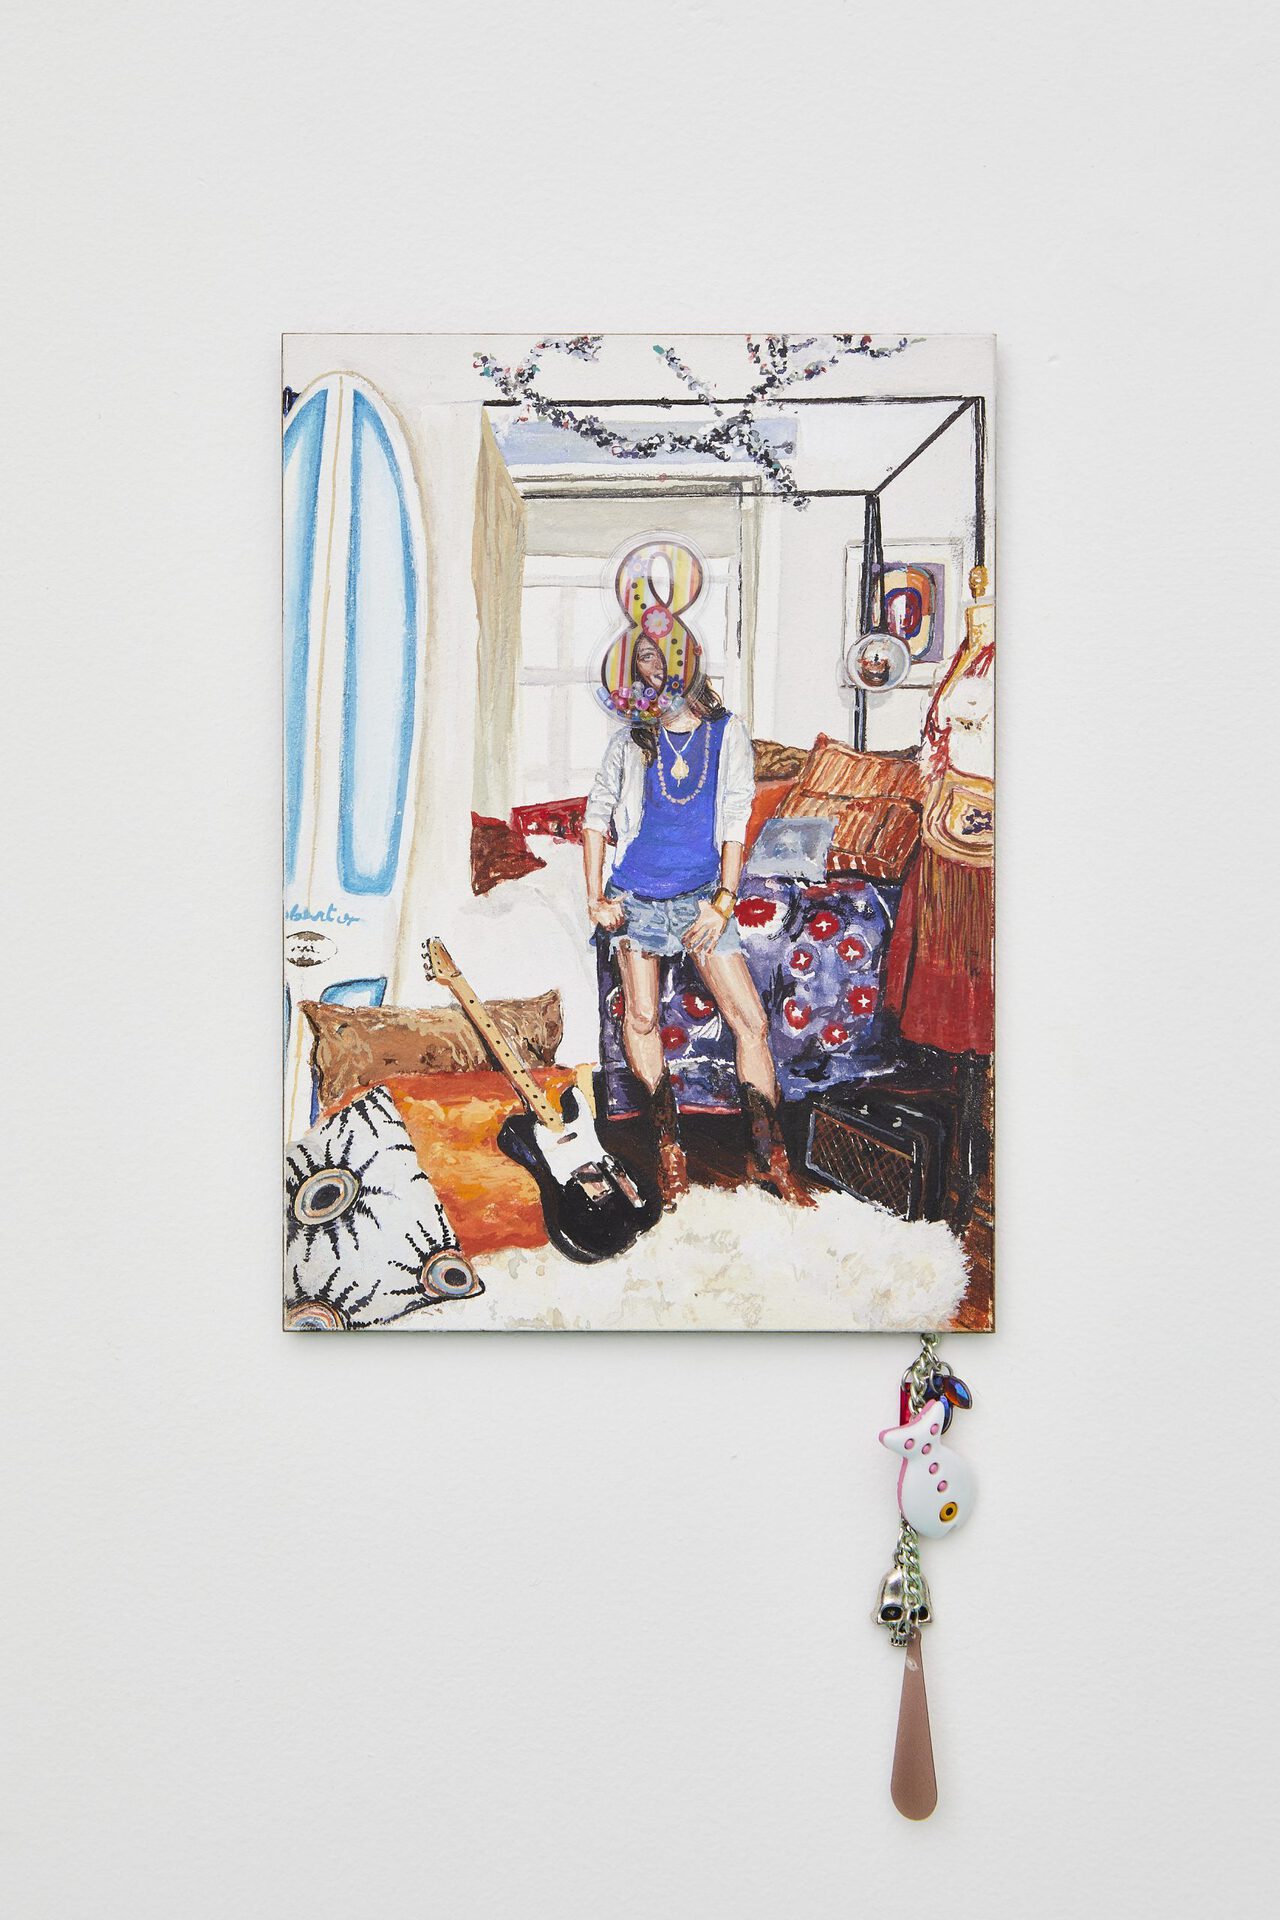 Jordan Barse An autograph from J.Lo, 2020 Gouache and sticker, chain and charms on aquaboard